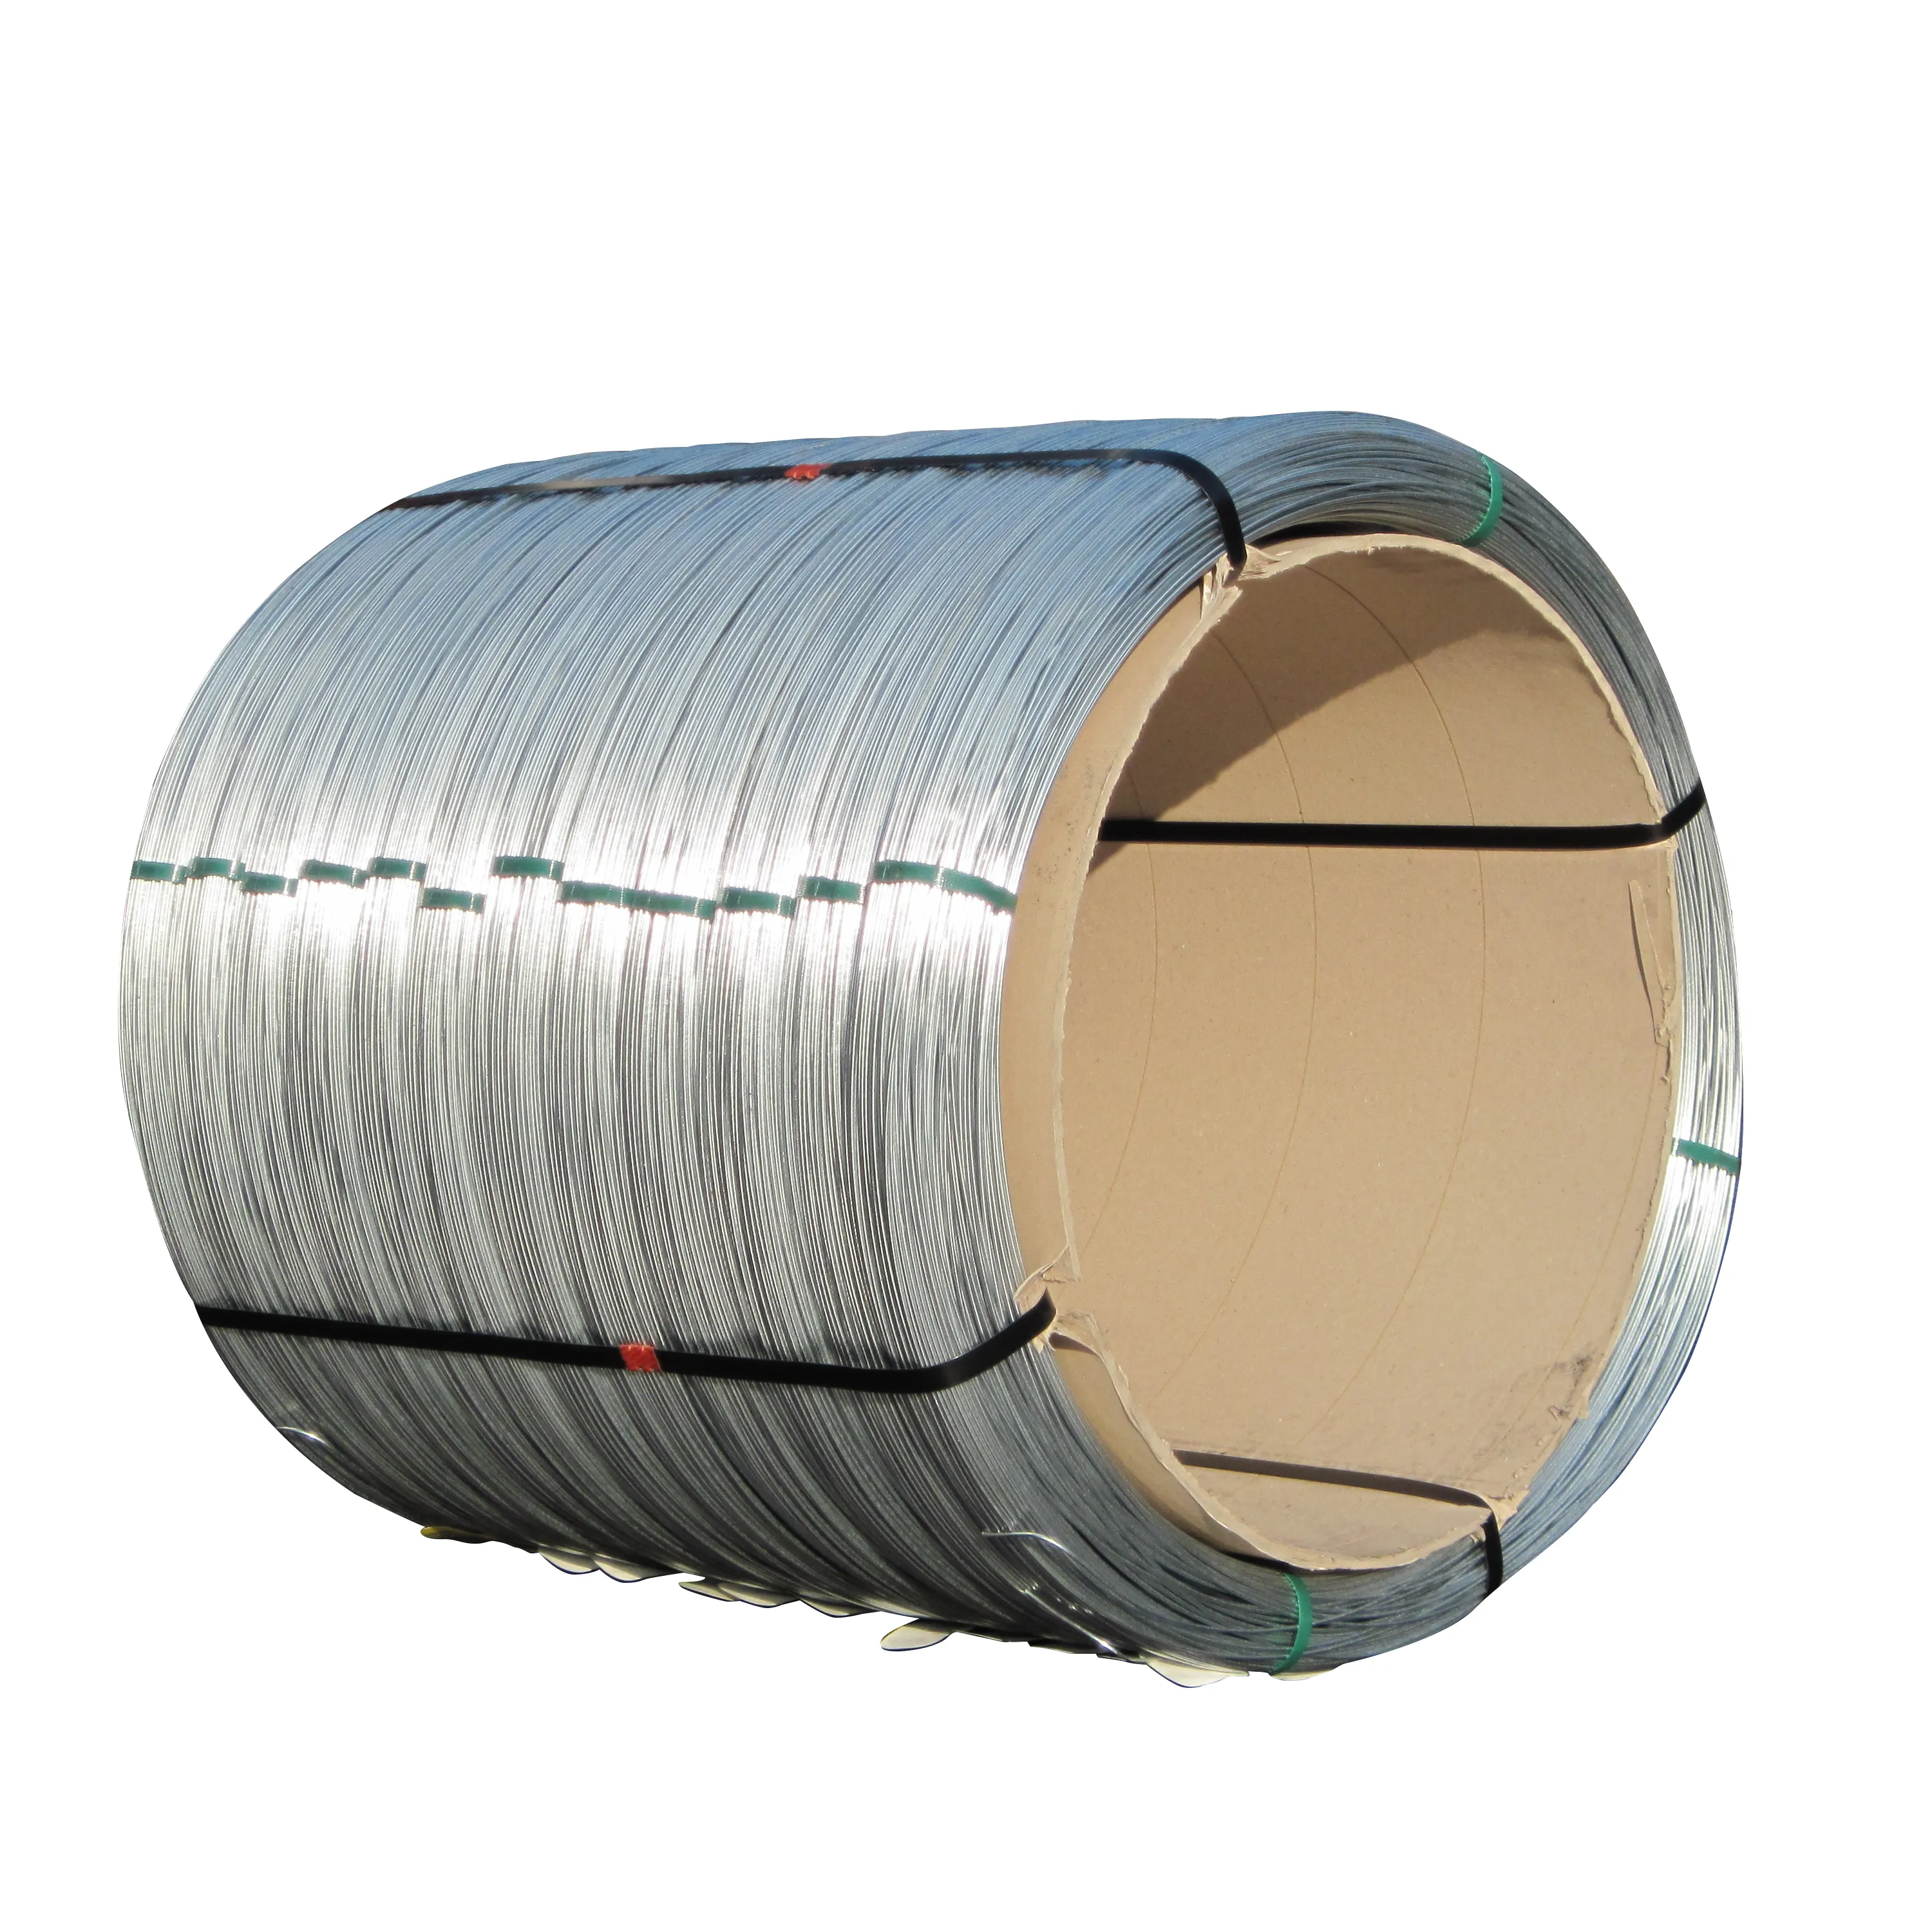 Top quality Italian zinc-aluminium steel wire diameter 1.60 mm for vineyards installations in agriculture